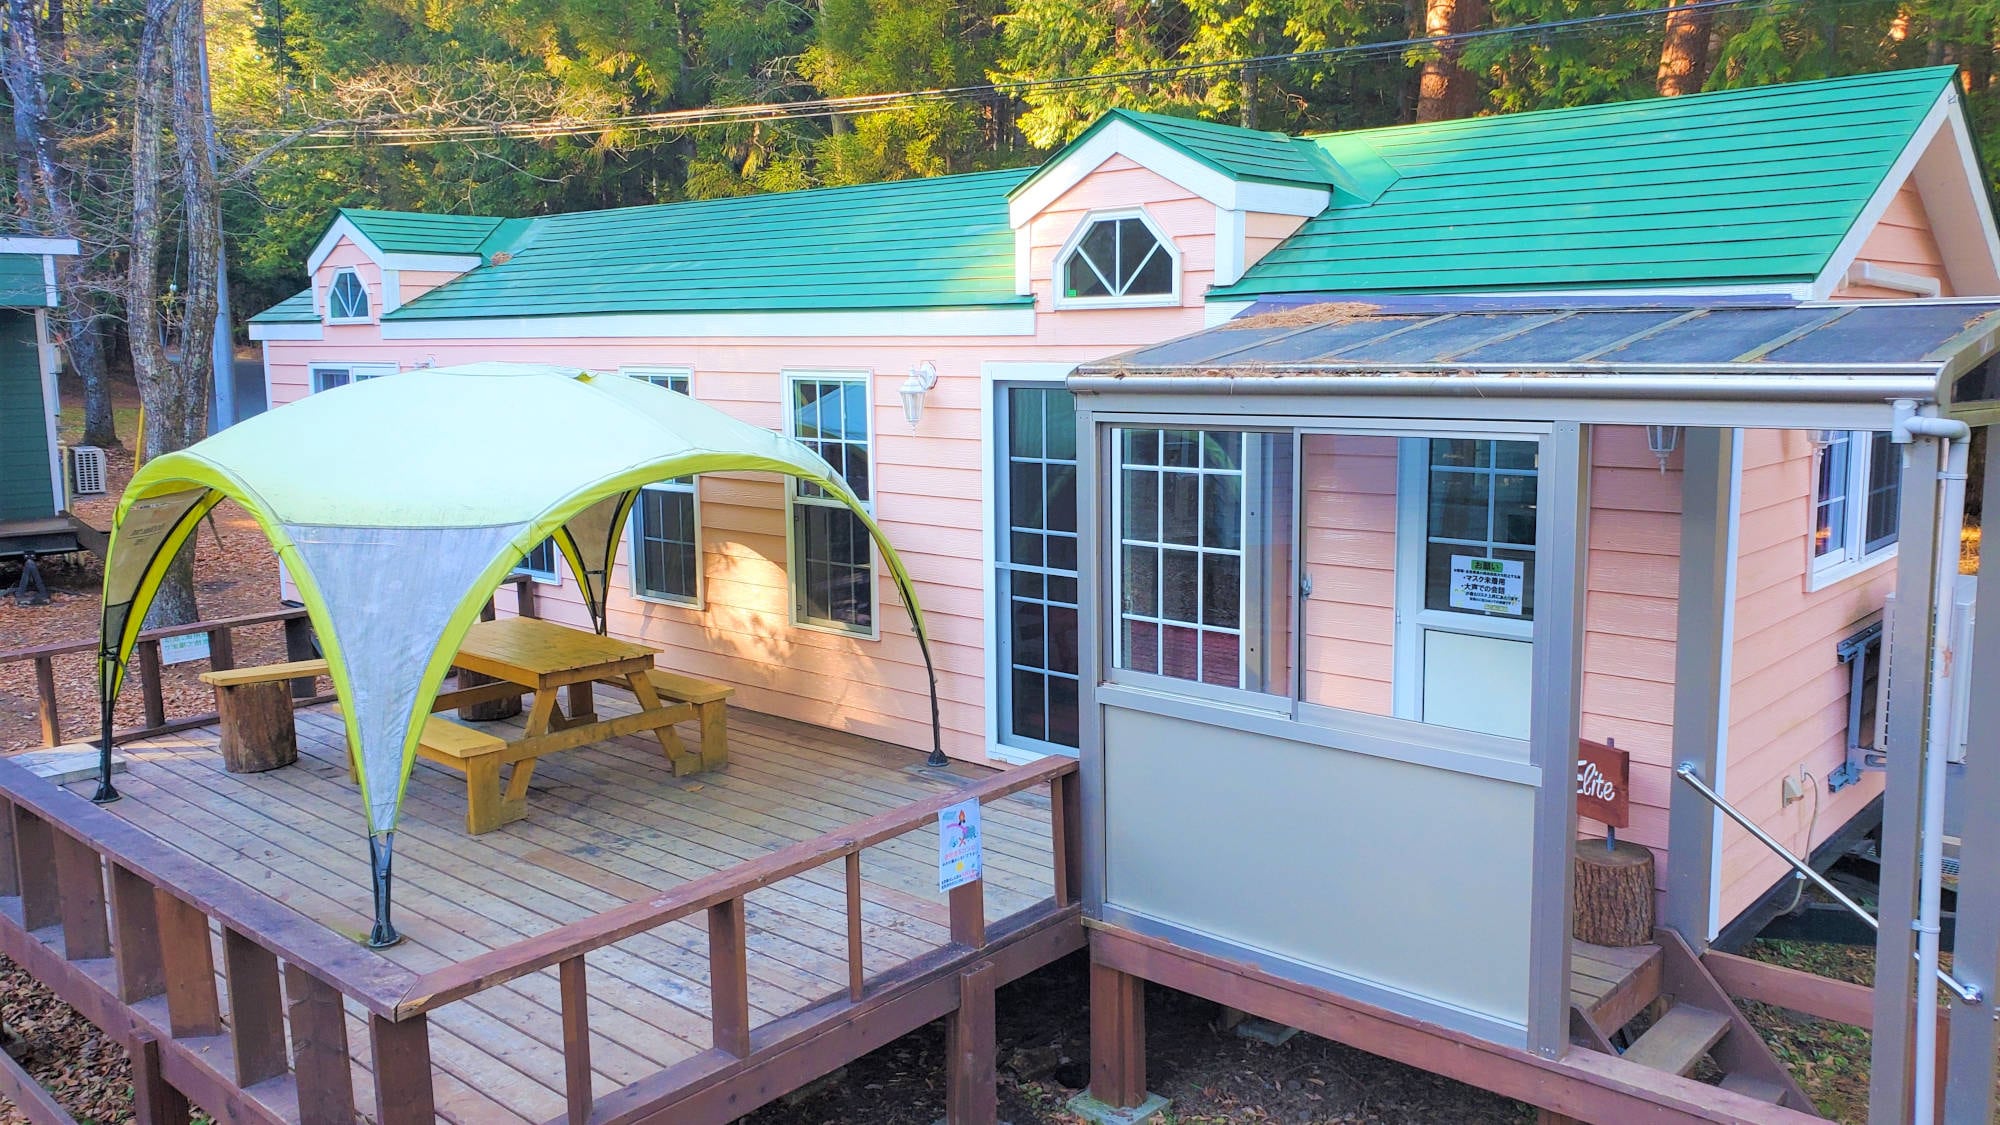 ・Trailer house “Elite” is fully equipped and has specifications that allow you to enjoy camping empty-handed.